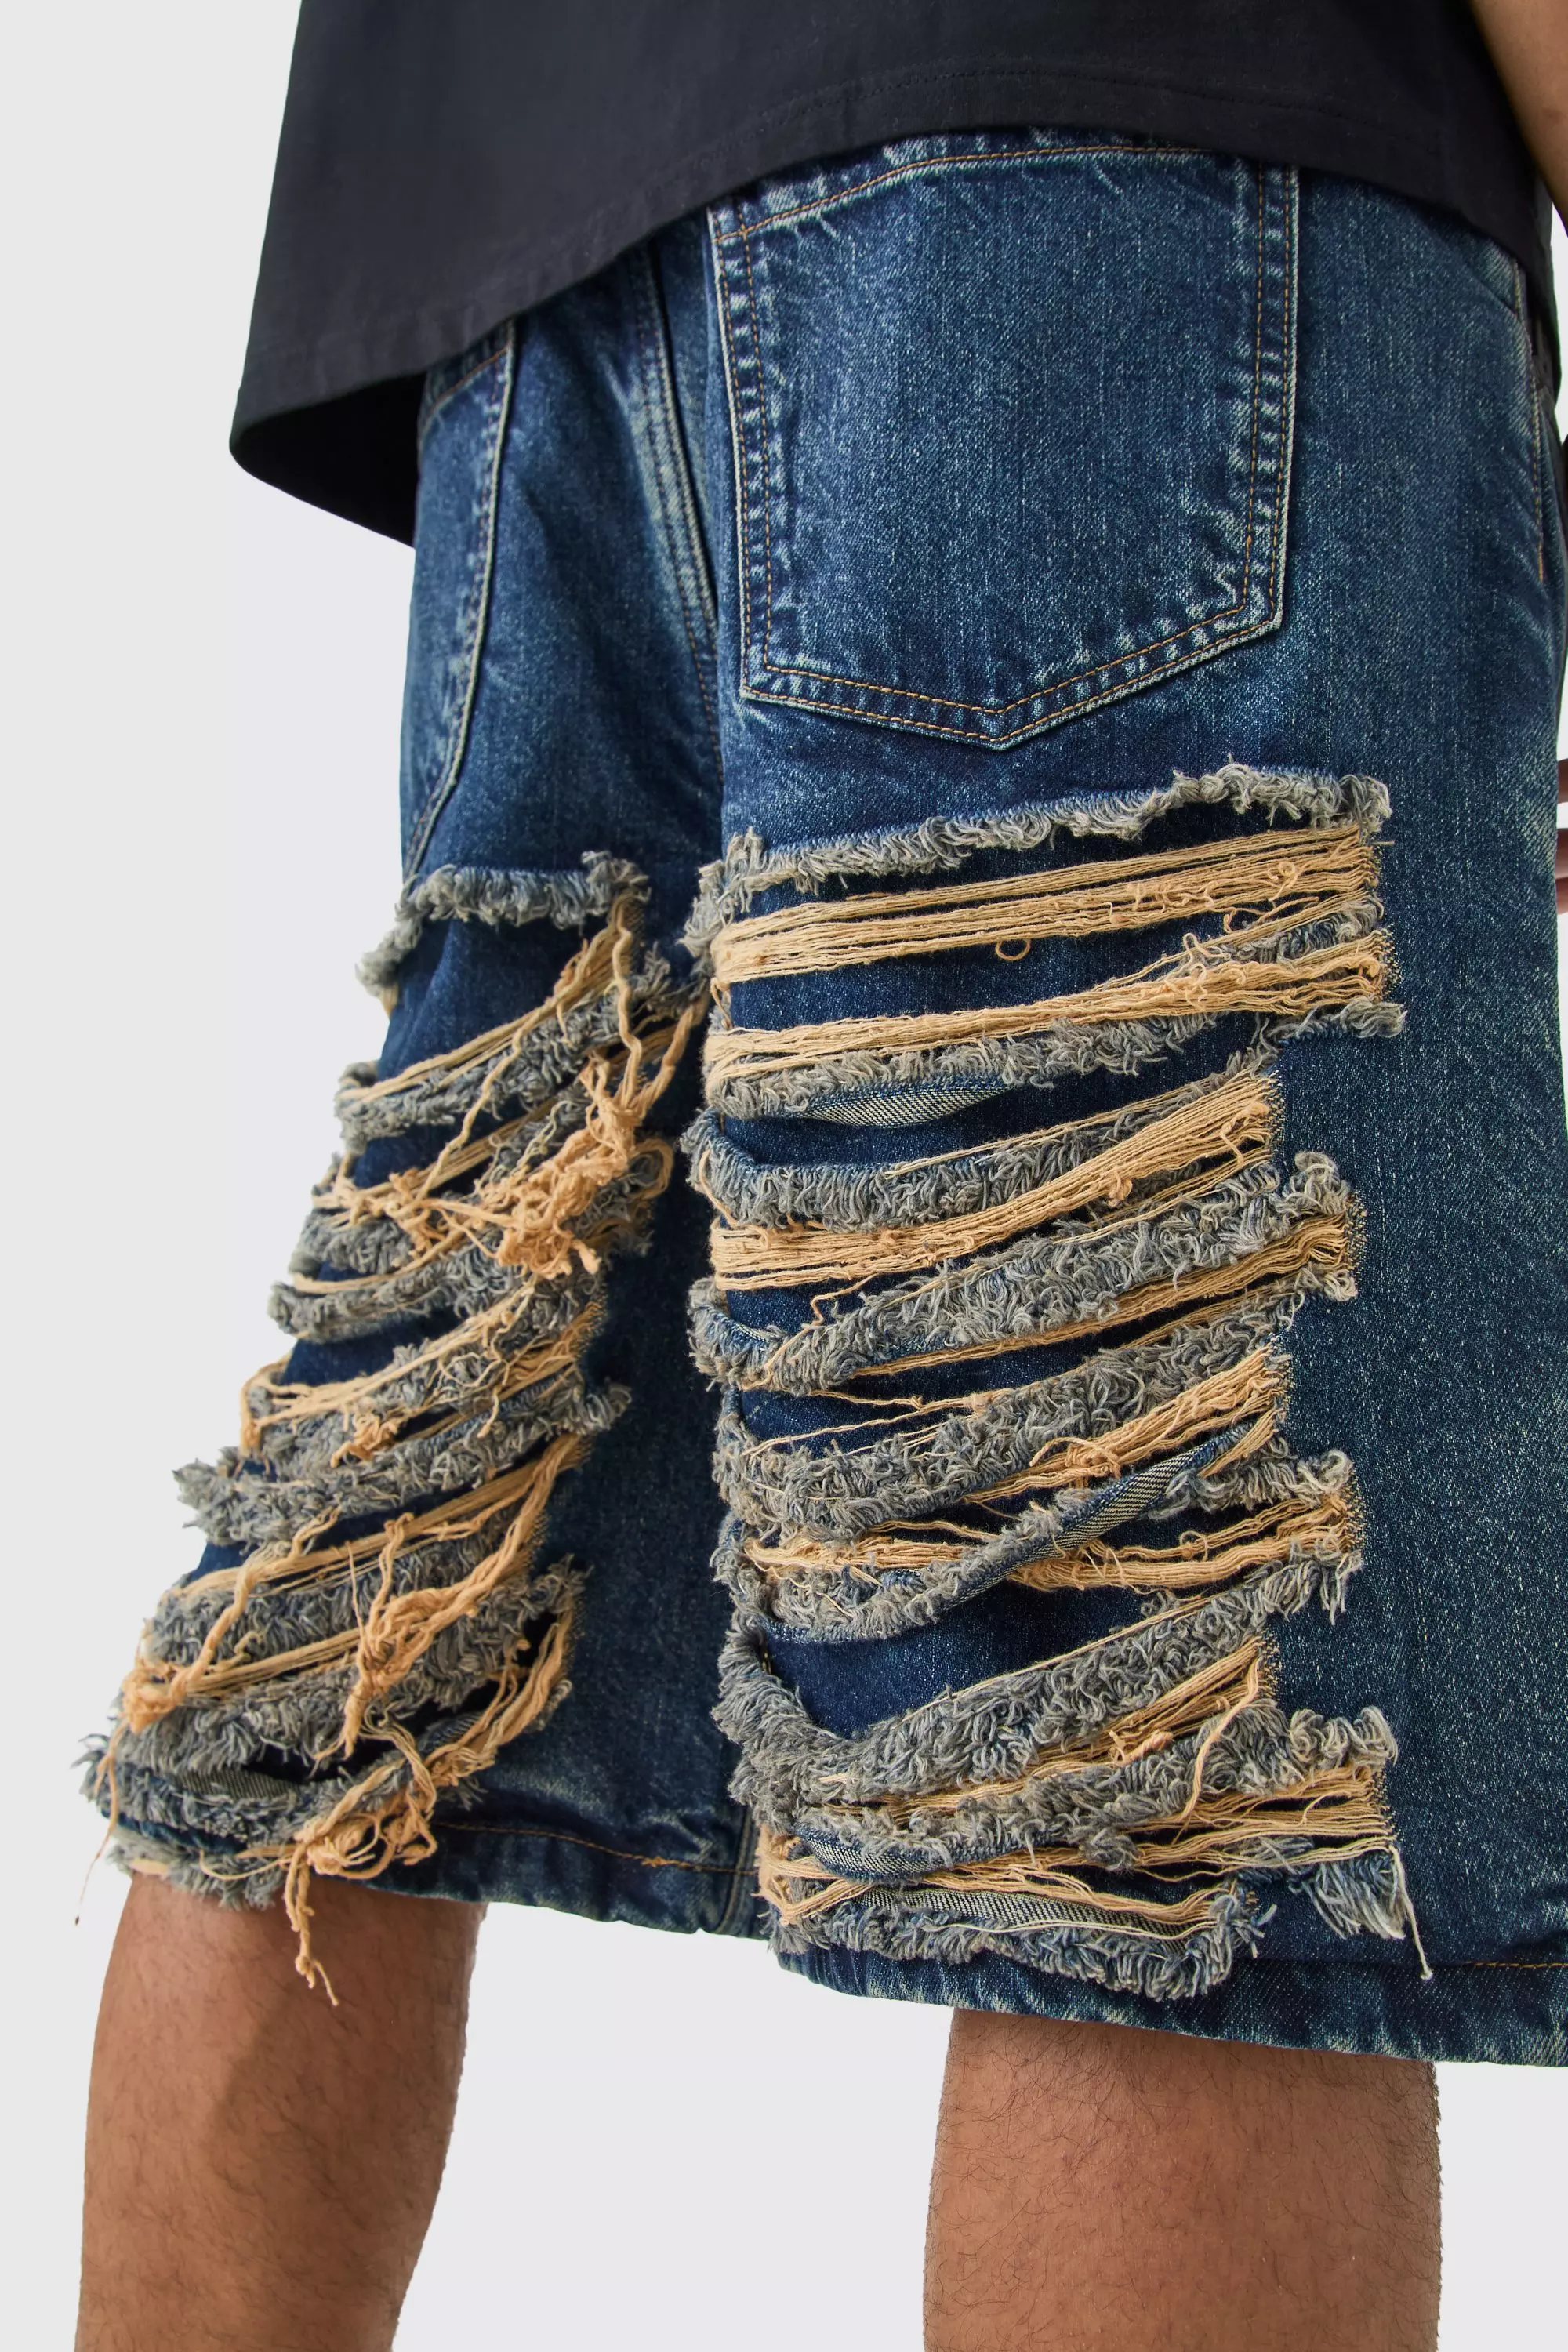 Relaxed Rigid Extreme Ripped Denim Jort In Antique Blue Antique blue